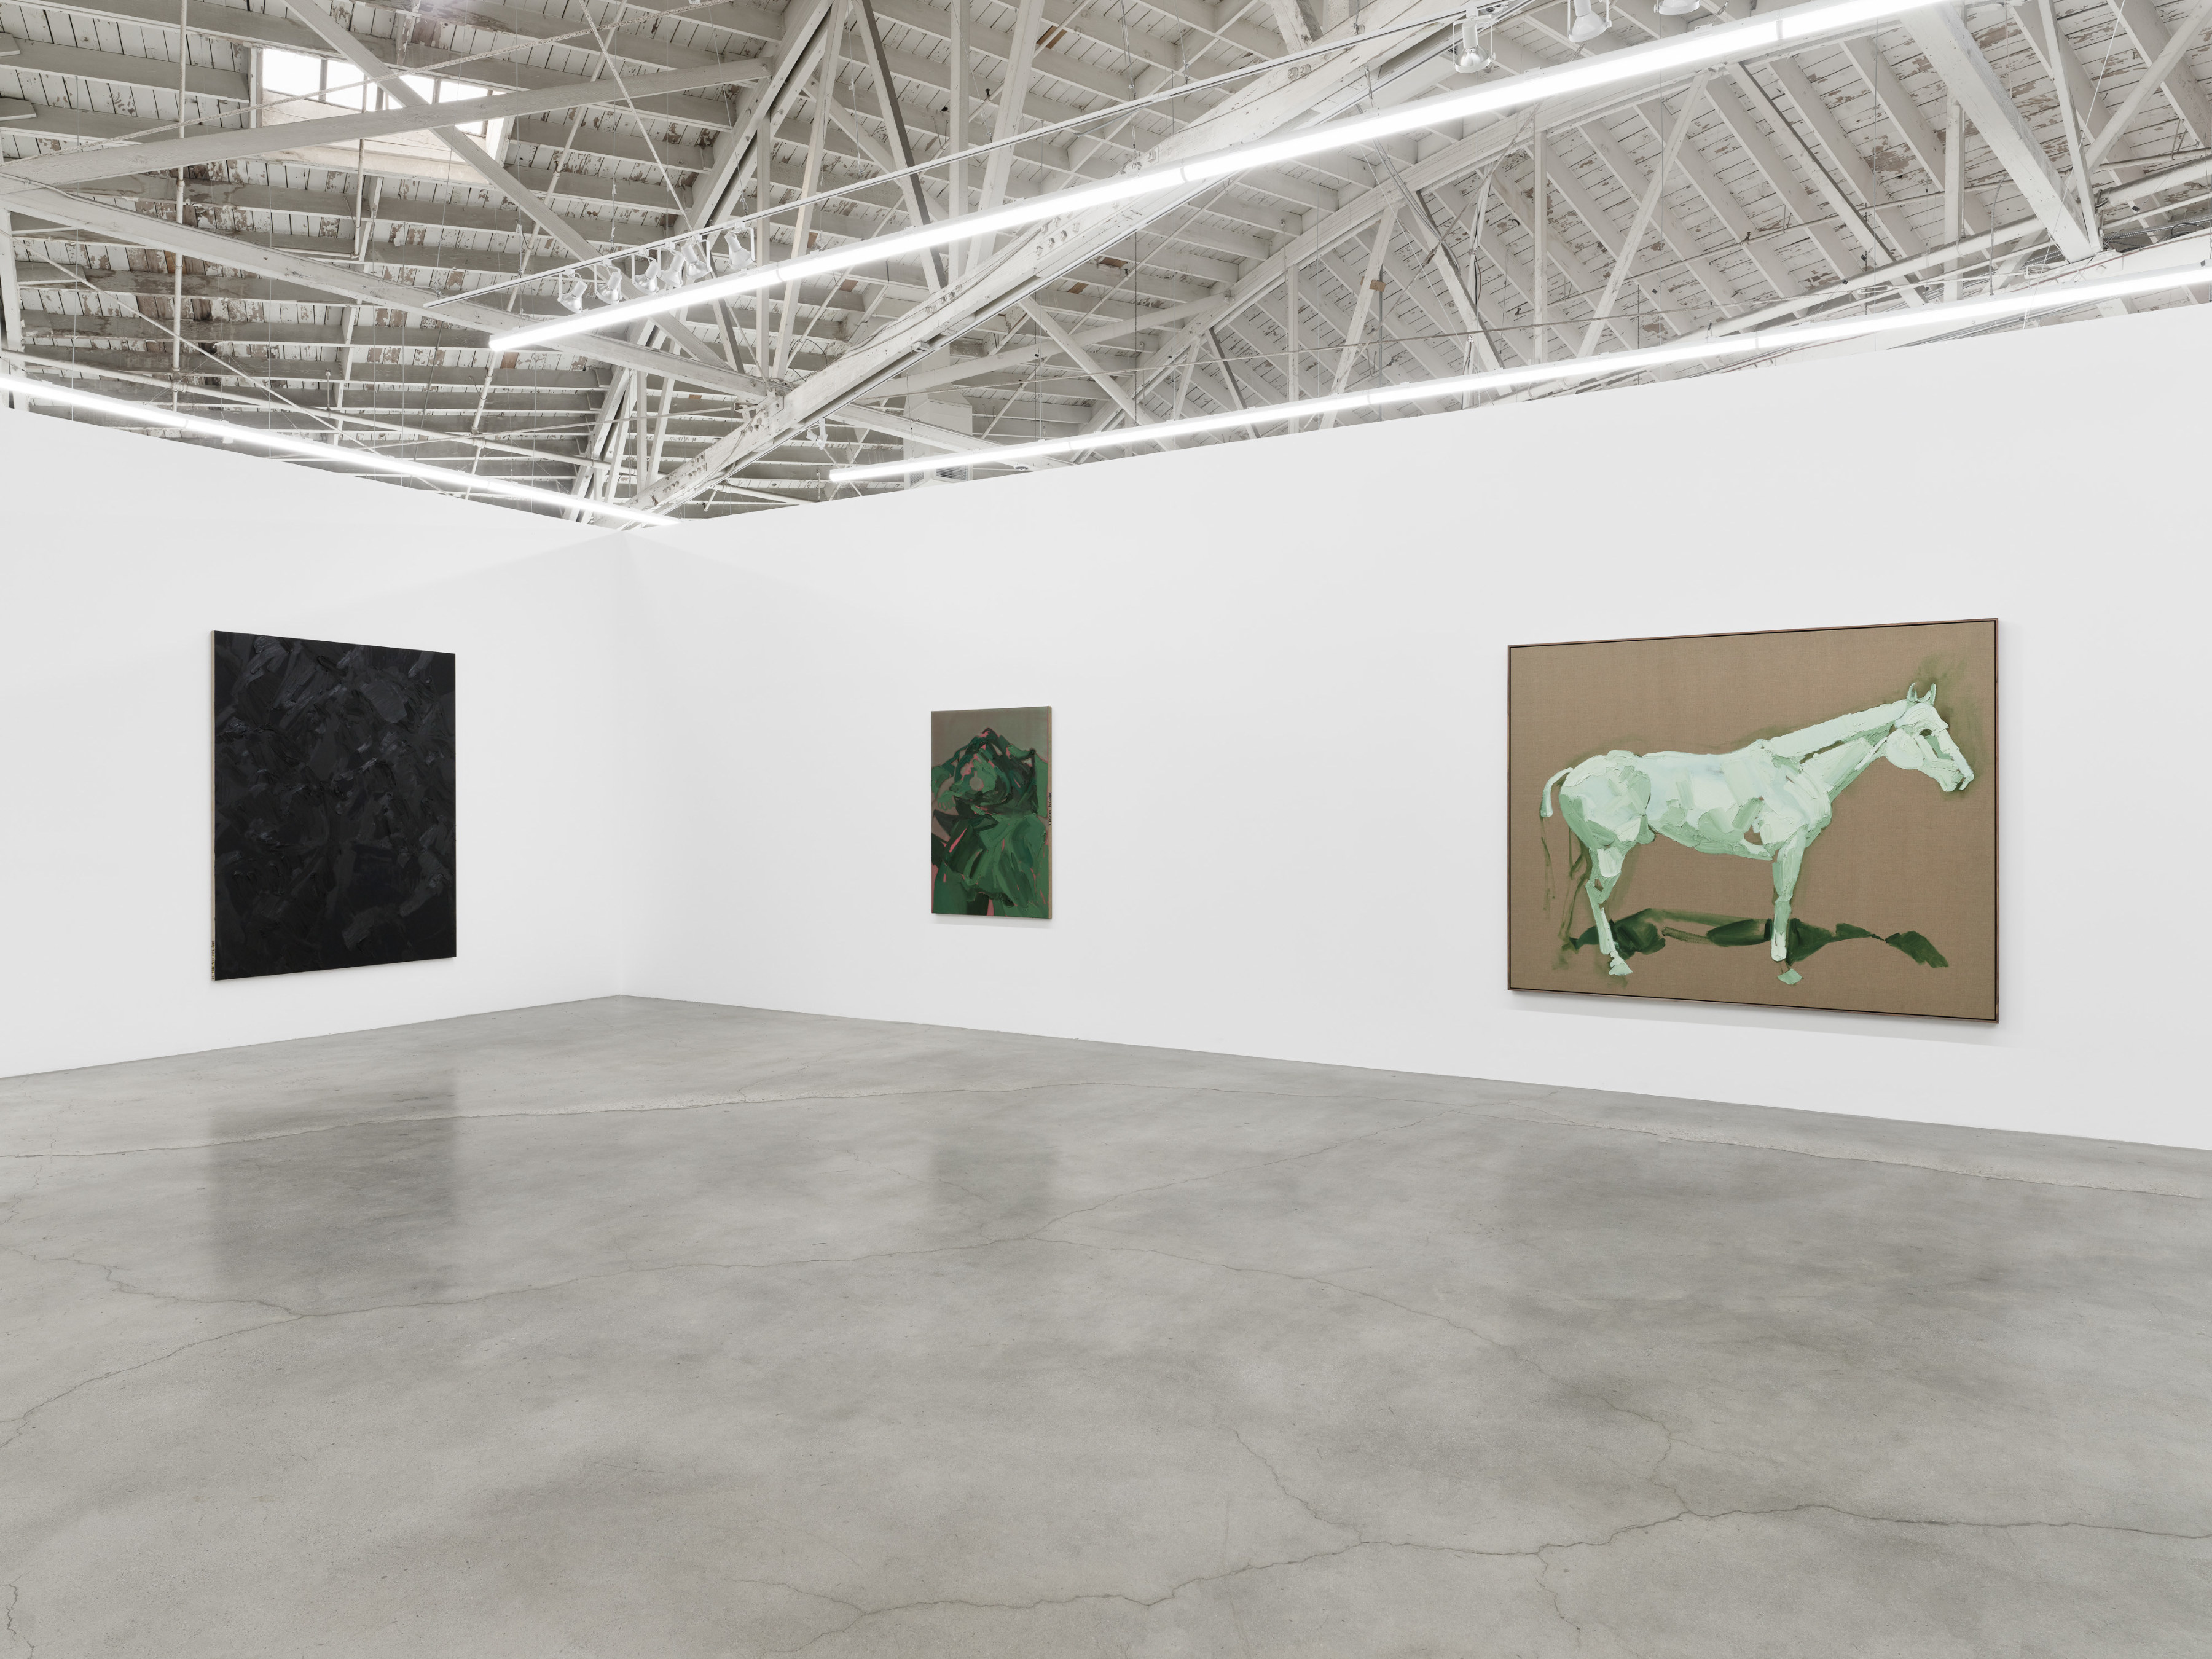 Andy Woll, Green Earth, installation view, 2022